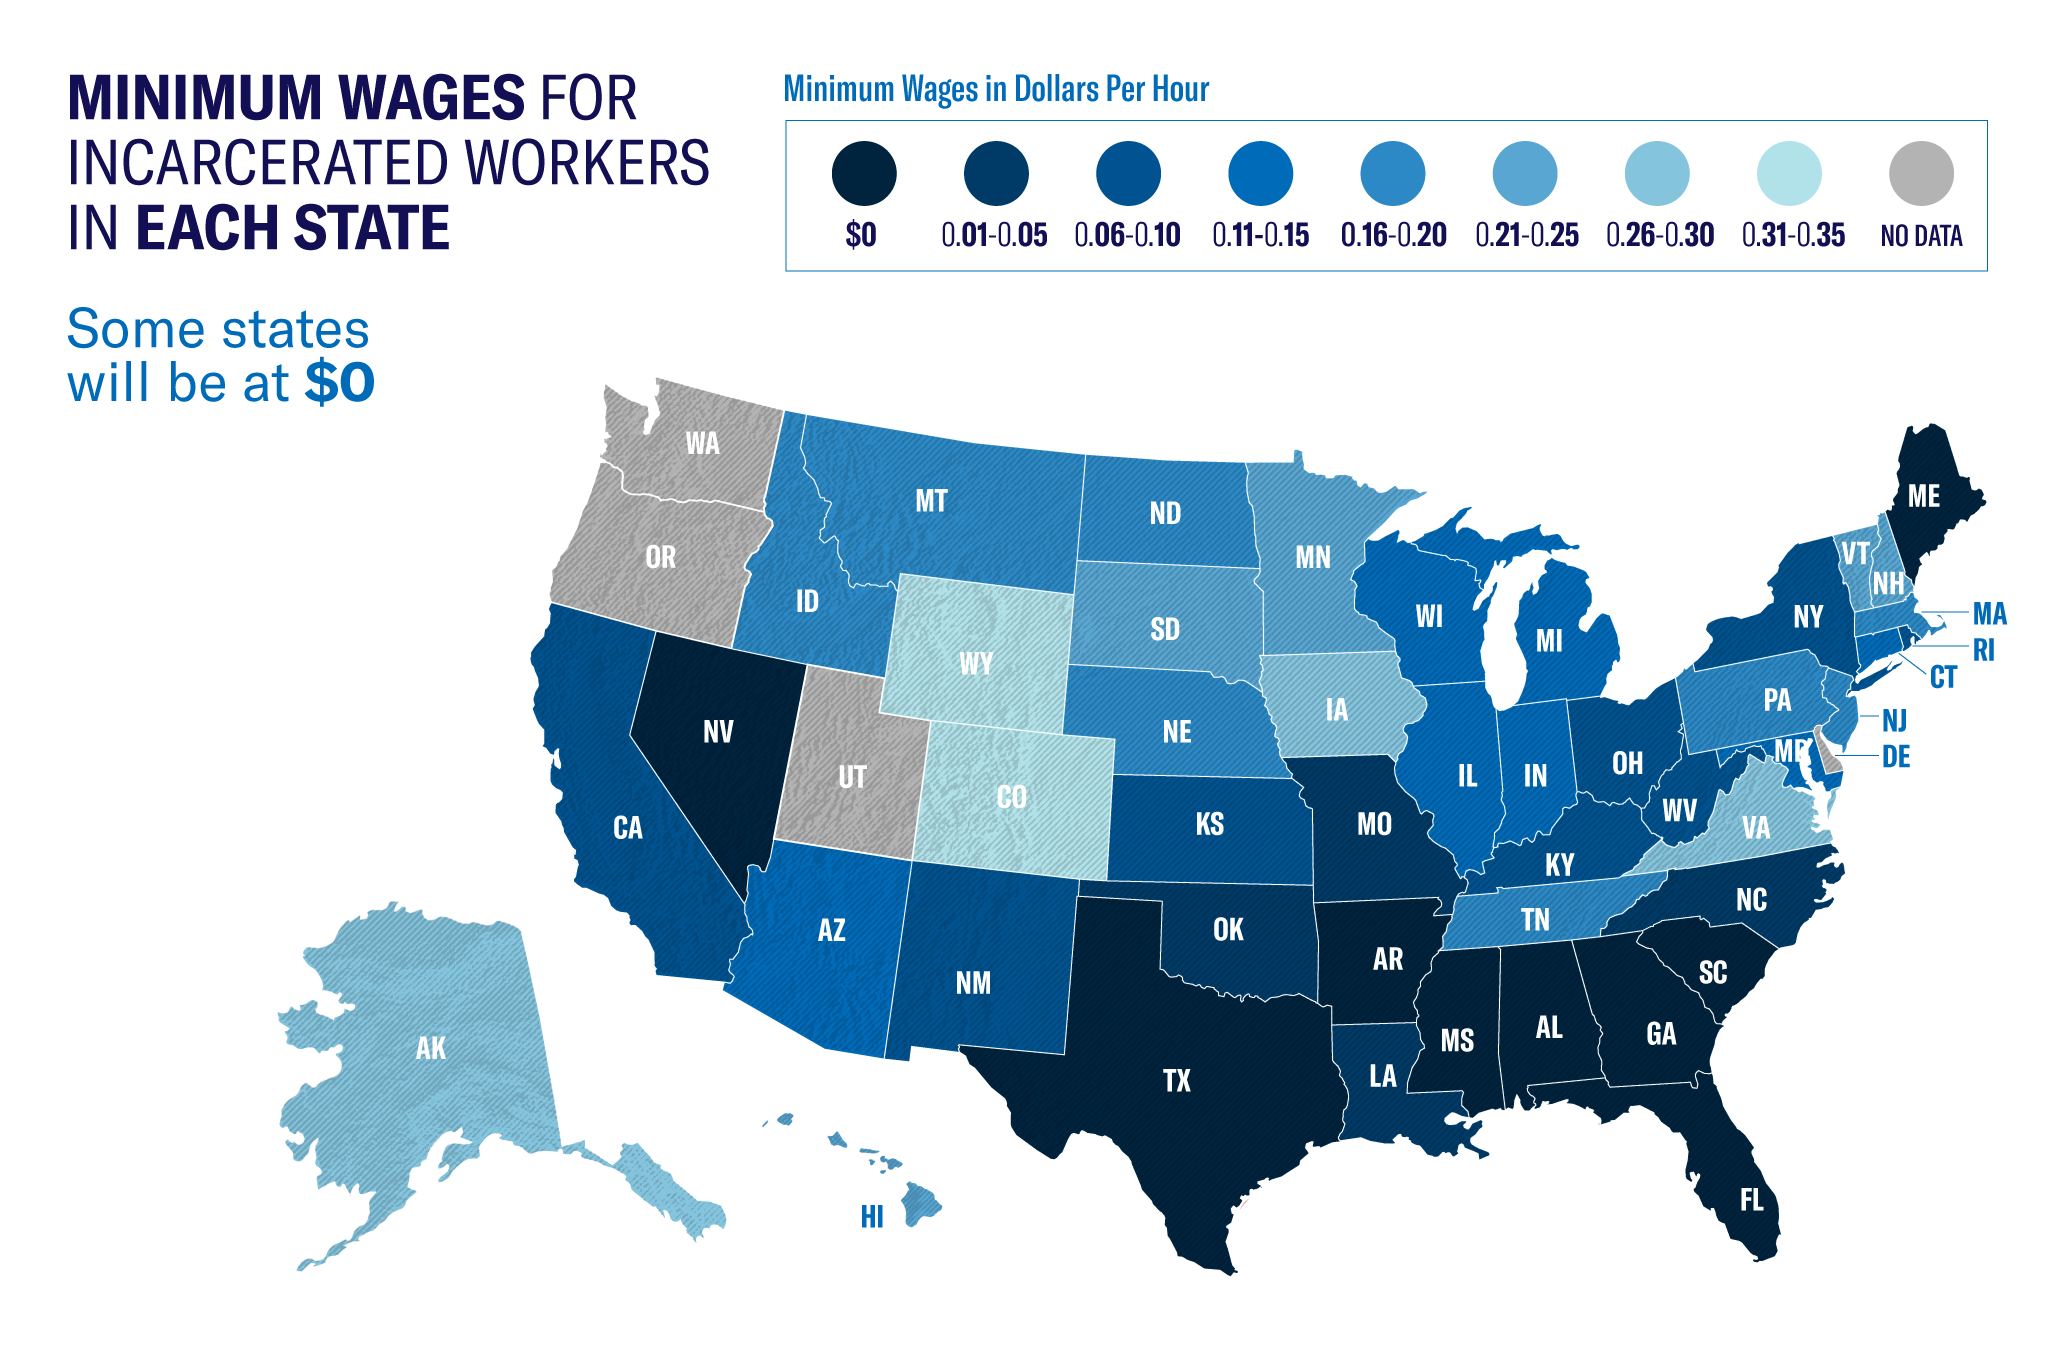 A map showing minimum hourly wages for incarcerated workers.